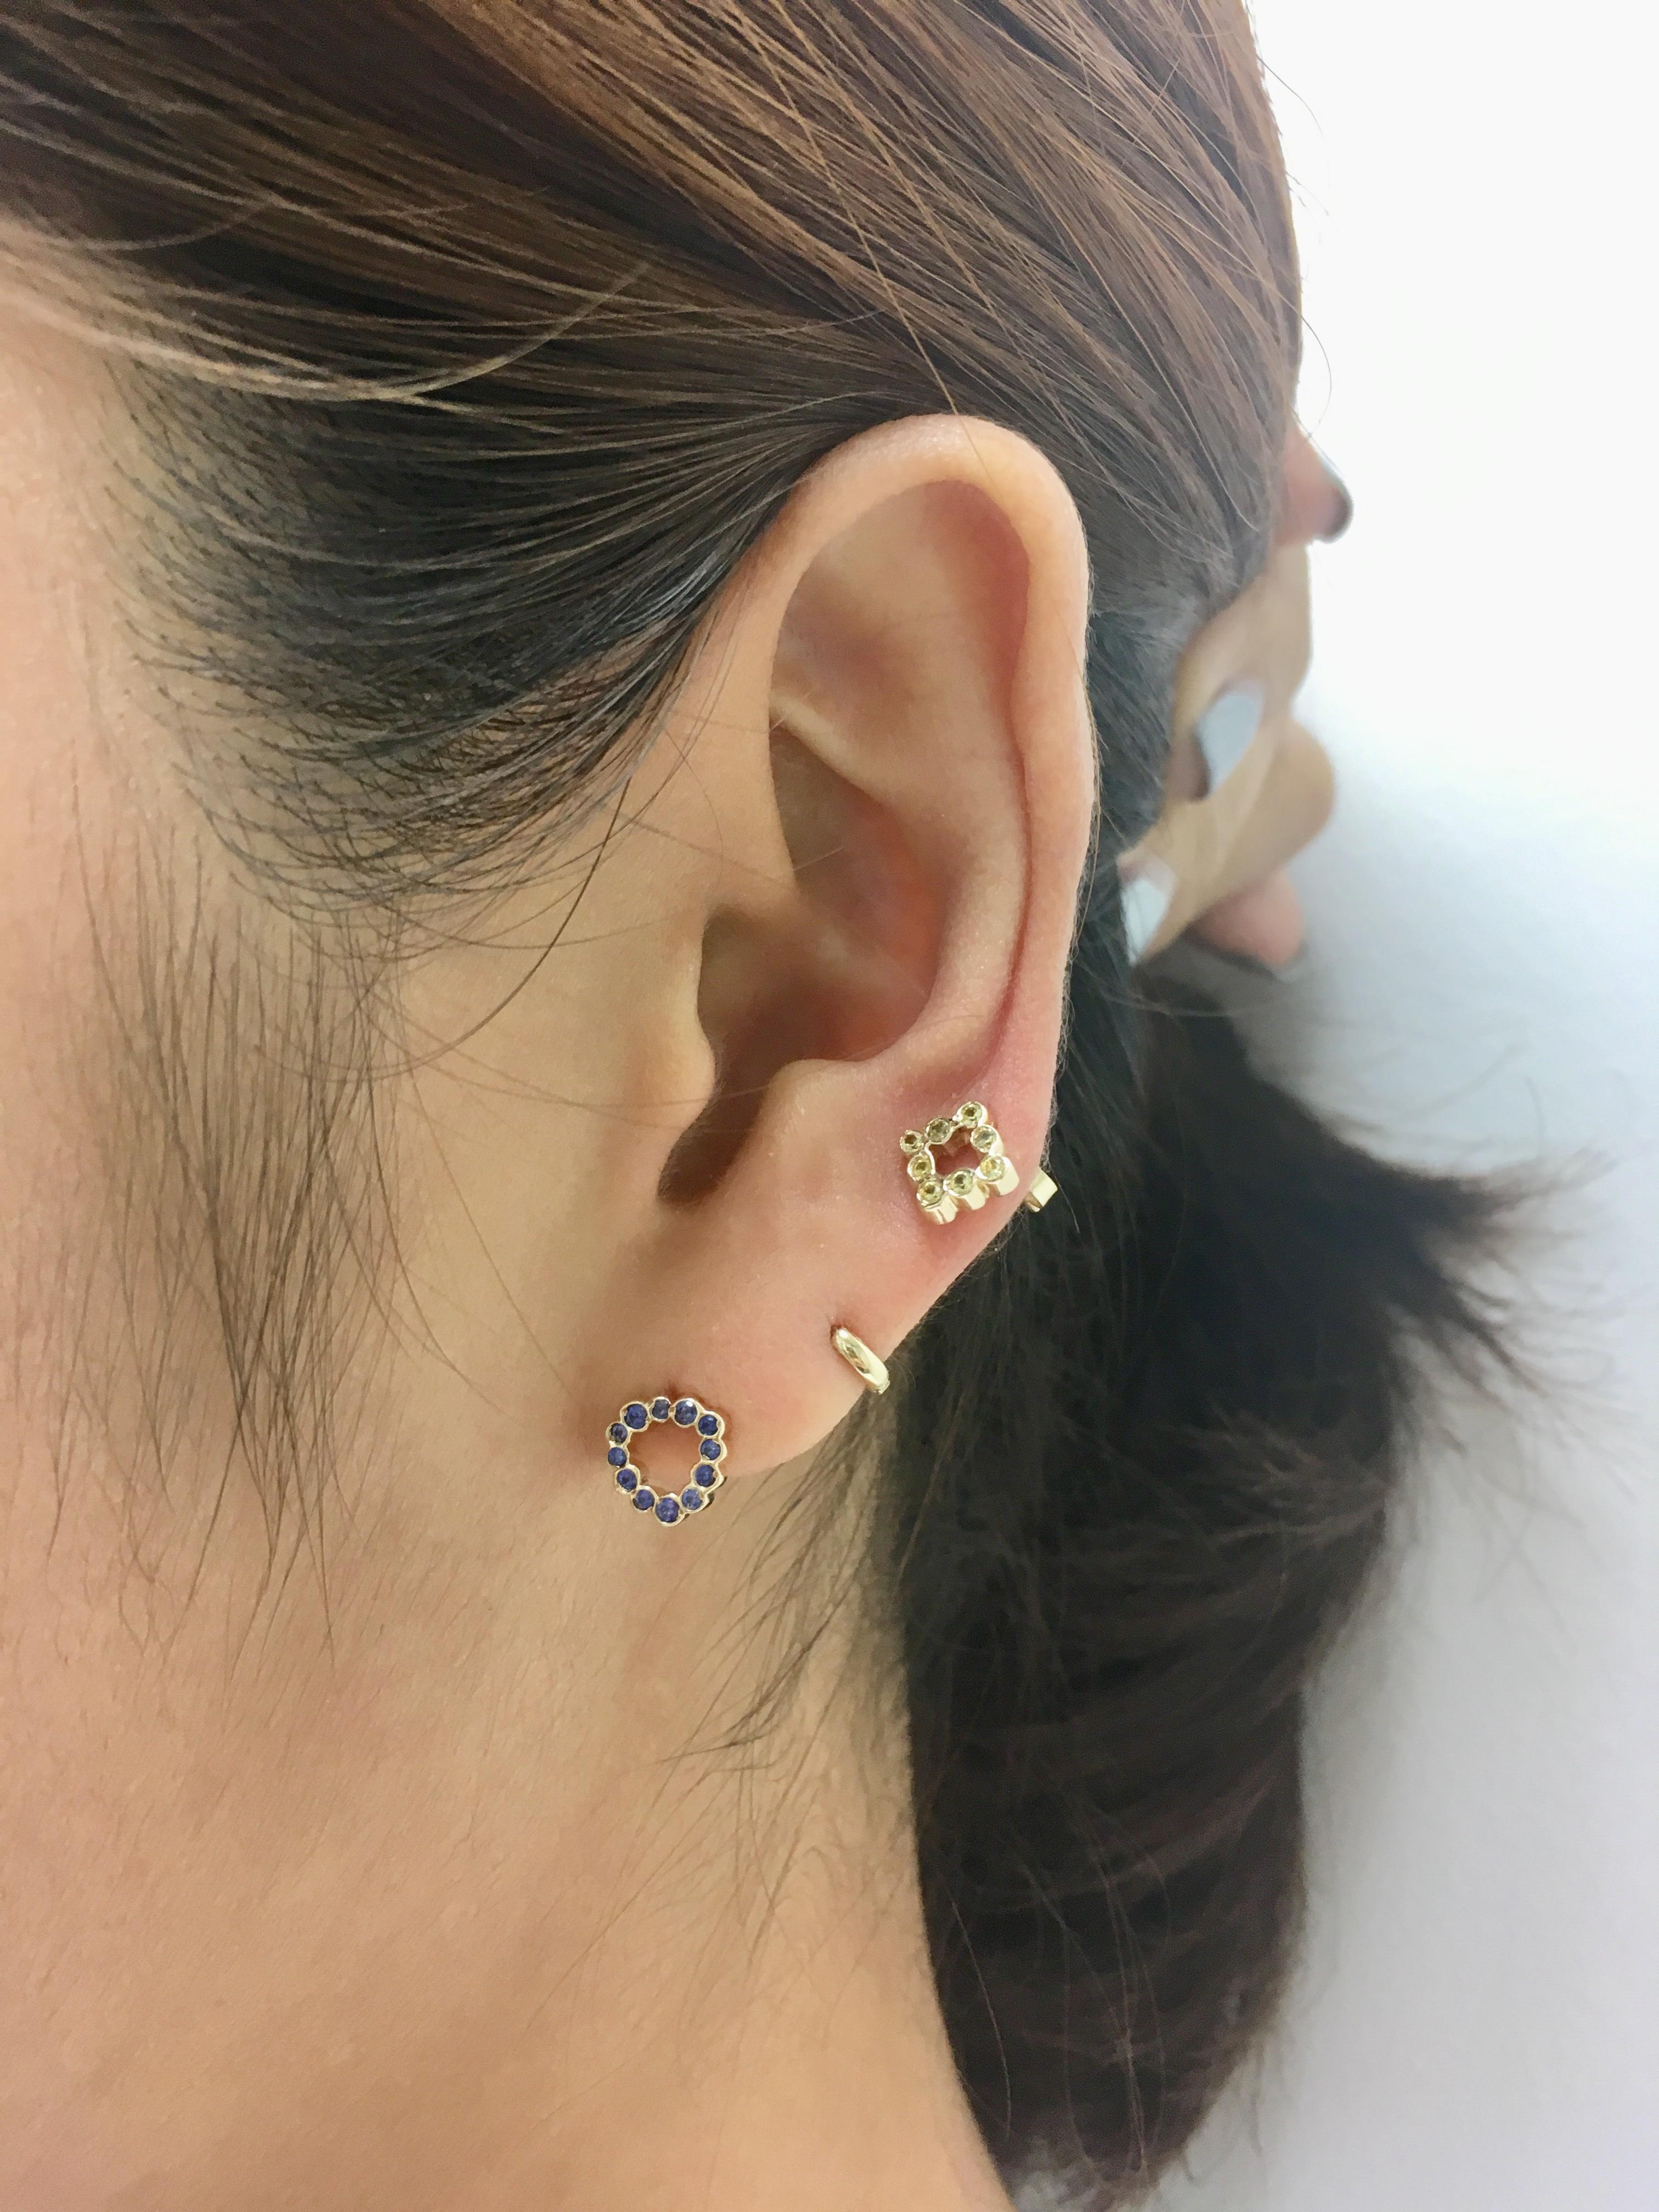 Wear these miniature triangle shaped stud earings with Blue Sapphires for a punch of
color on your ears. Mix and match with your favorite single earrings or wear them as a pair.

Inspired by seeing the cross-section view of life, as if slicing a